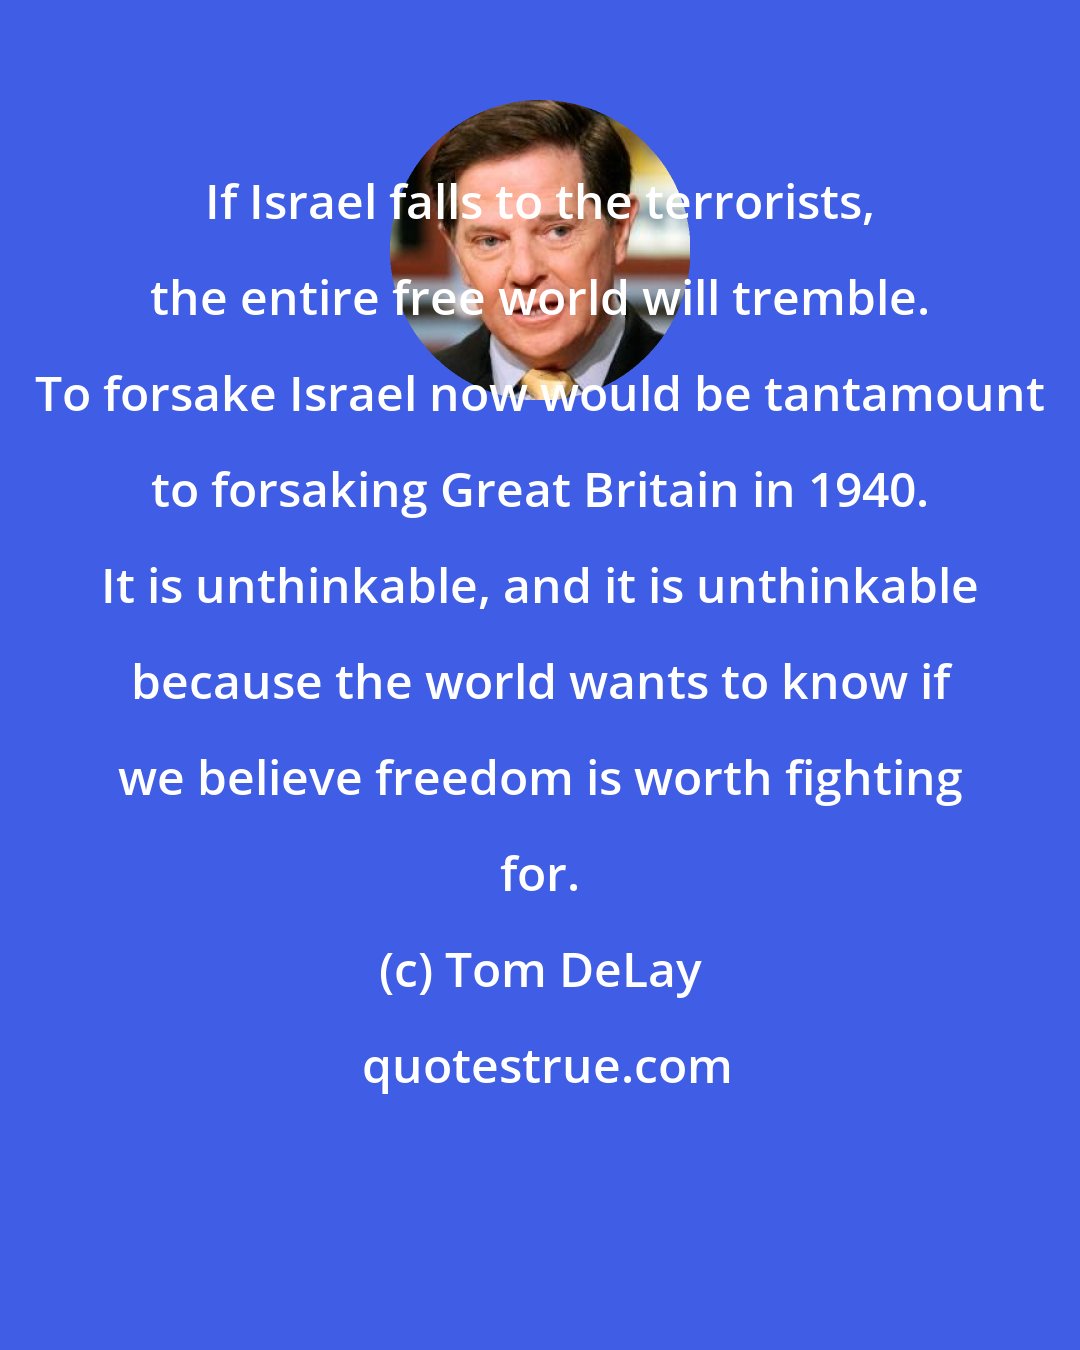 Tom DeLay: If Israel falls to the terrorists, the entire free world will tremble. To forsake Israel now would be tantamount to forsaking Great Britain in 1940. It is unthinkable, and it is unthinkable because the world wants to know if we believe freedom is worth fighting for.